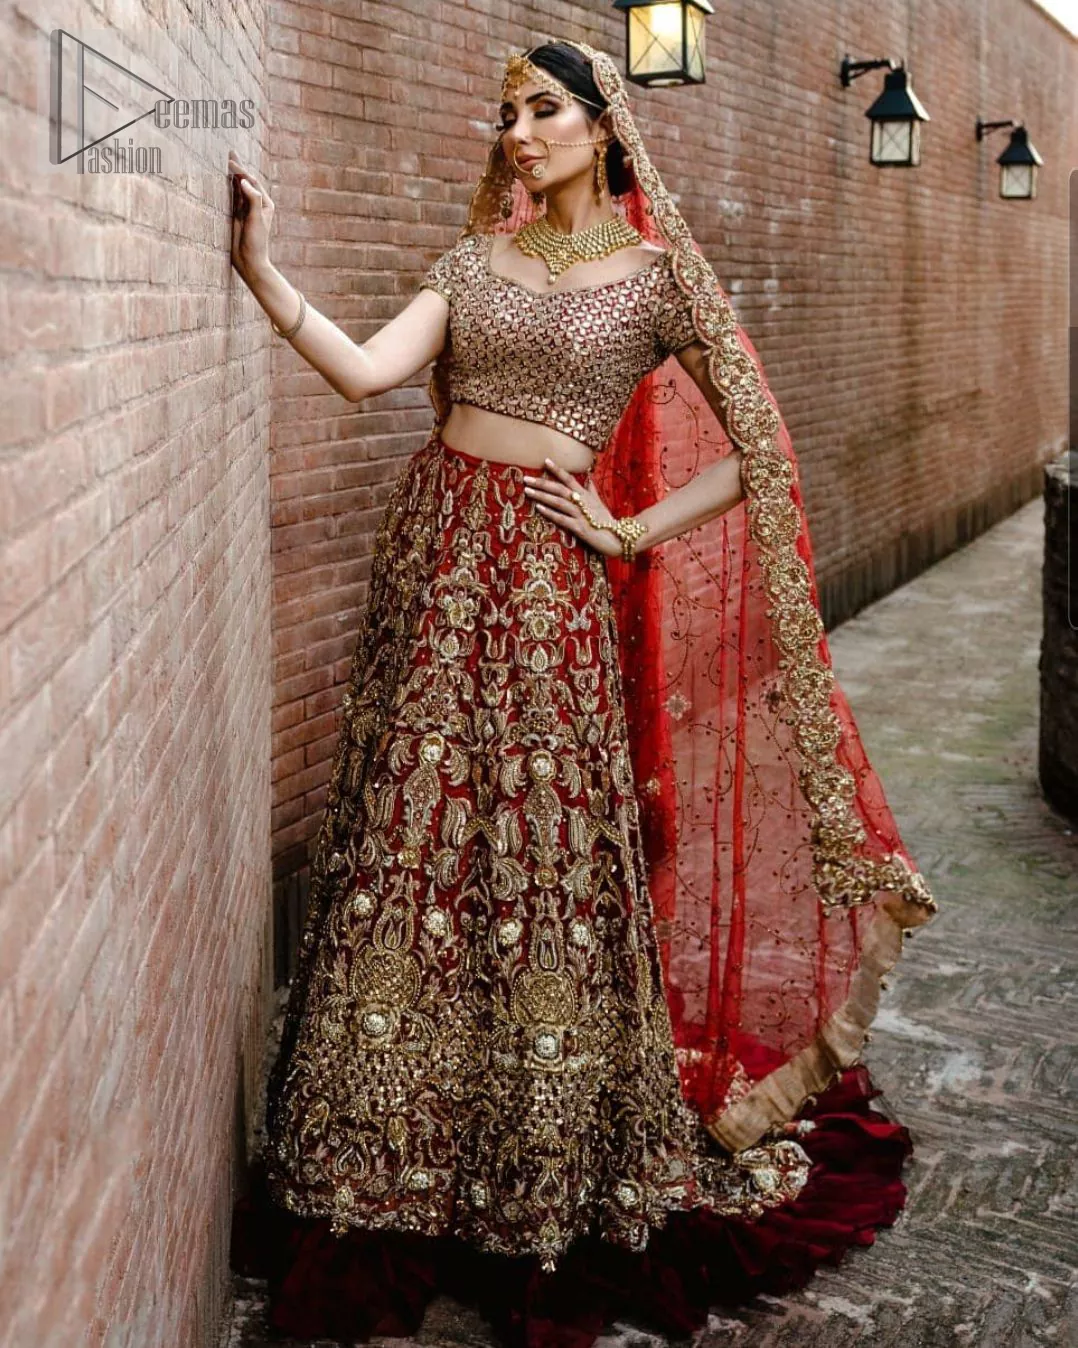 . It’s beautiful sweetheart neckline proceeds with mesmerizing Golden embroidery, all designed fantastically for your reception day. Red Ruffled Back Train Lehenga Blouse – Dupatta.